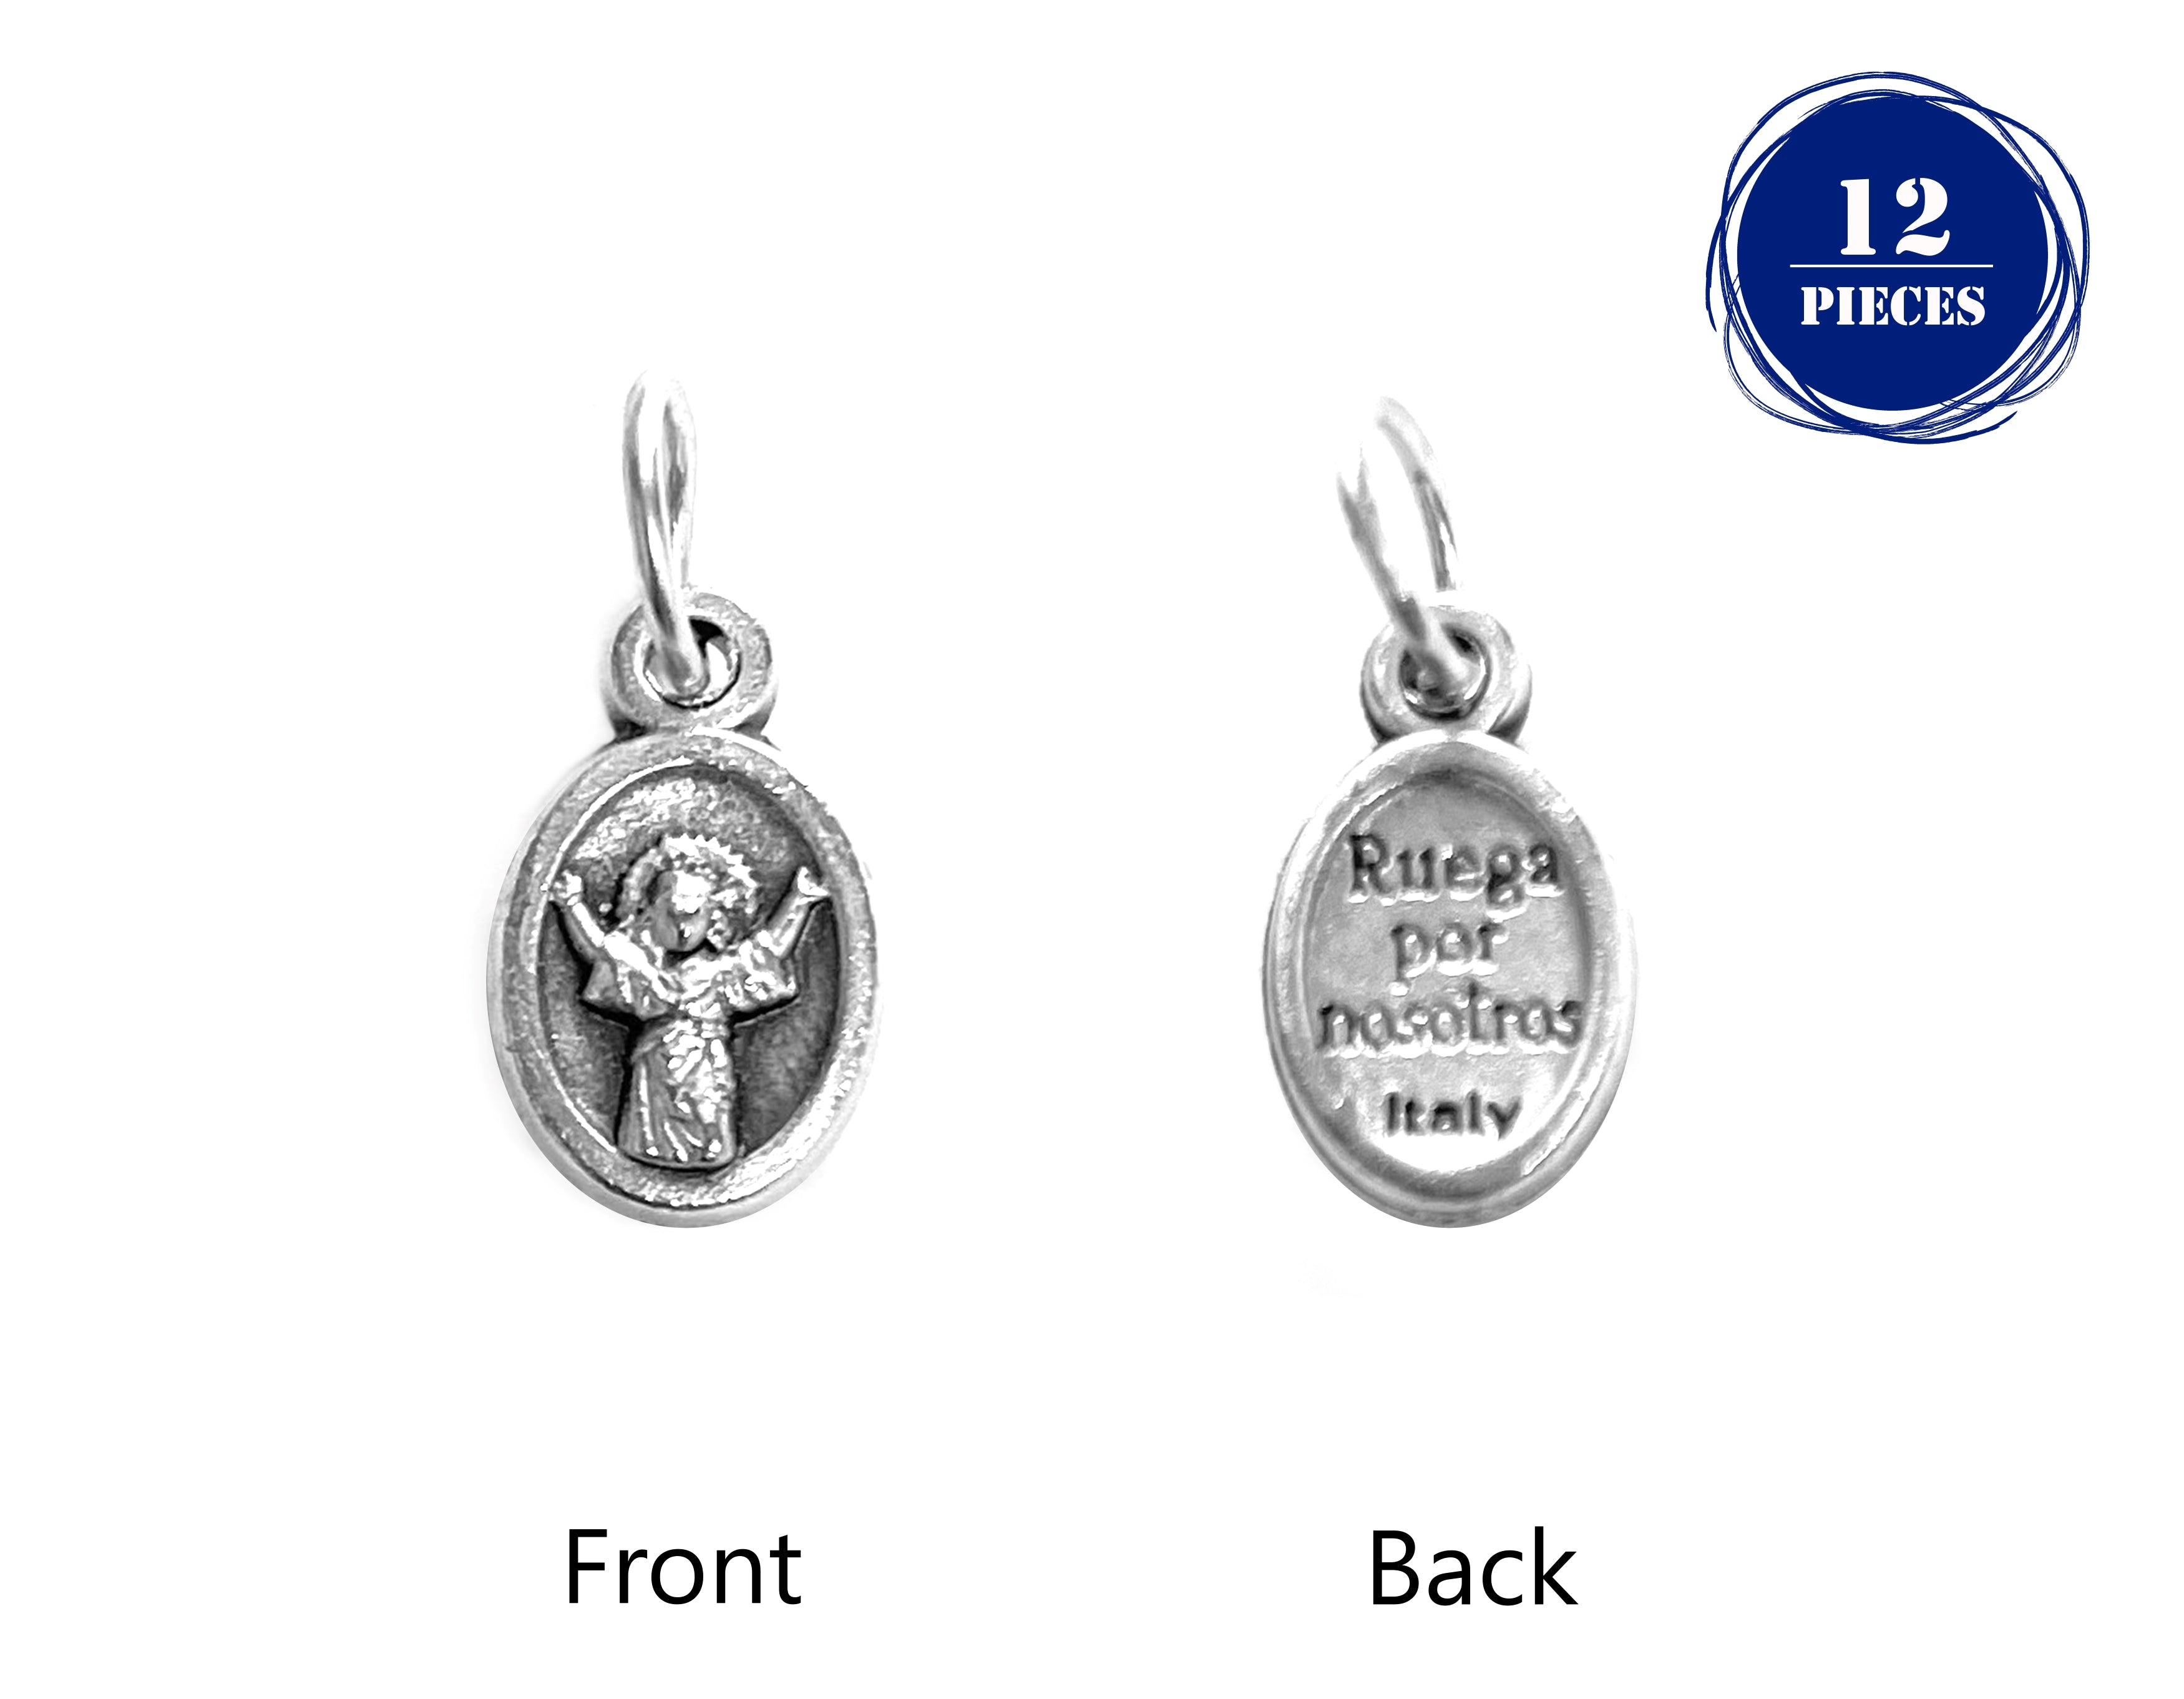 Saints tiny medals in oxidized silver made in Italy 0.5" x 0.3"